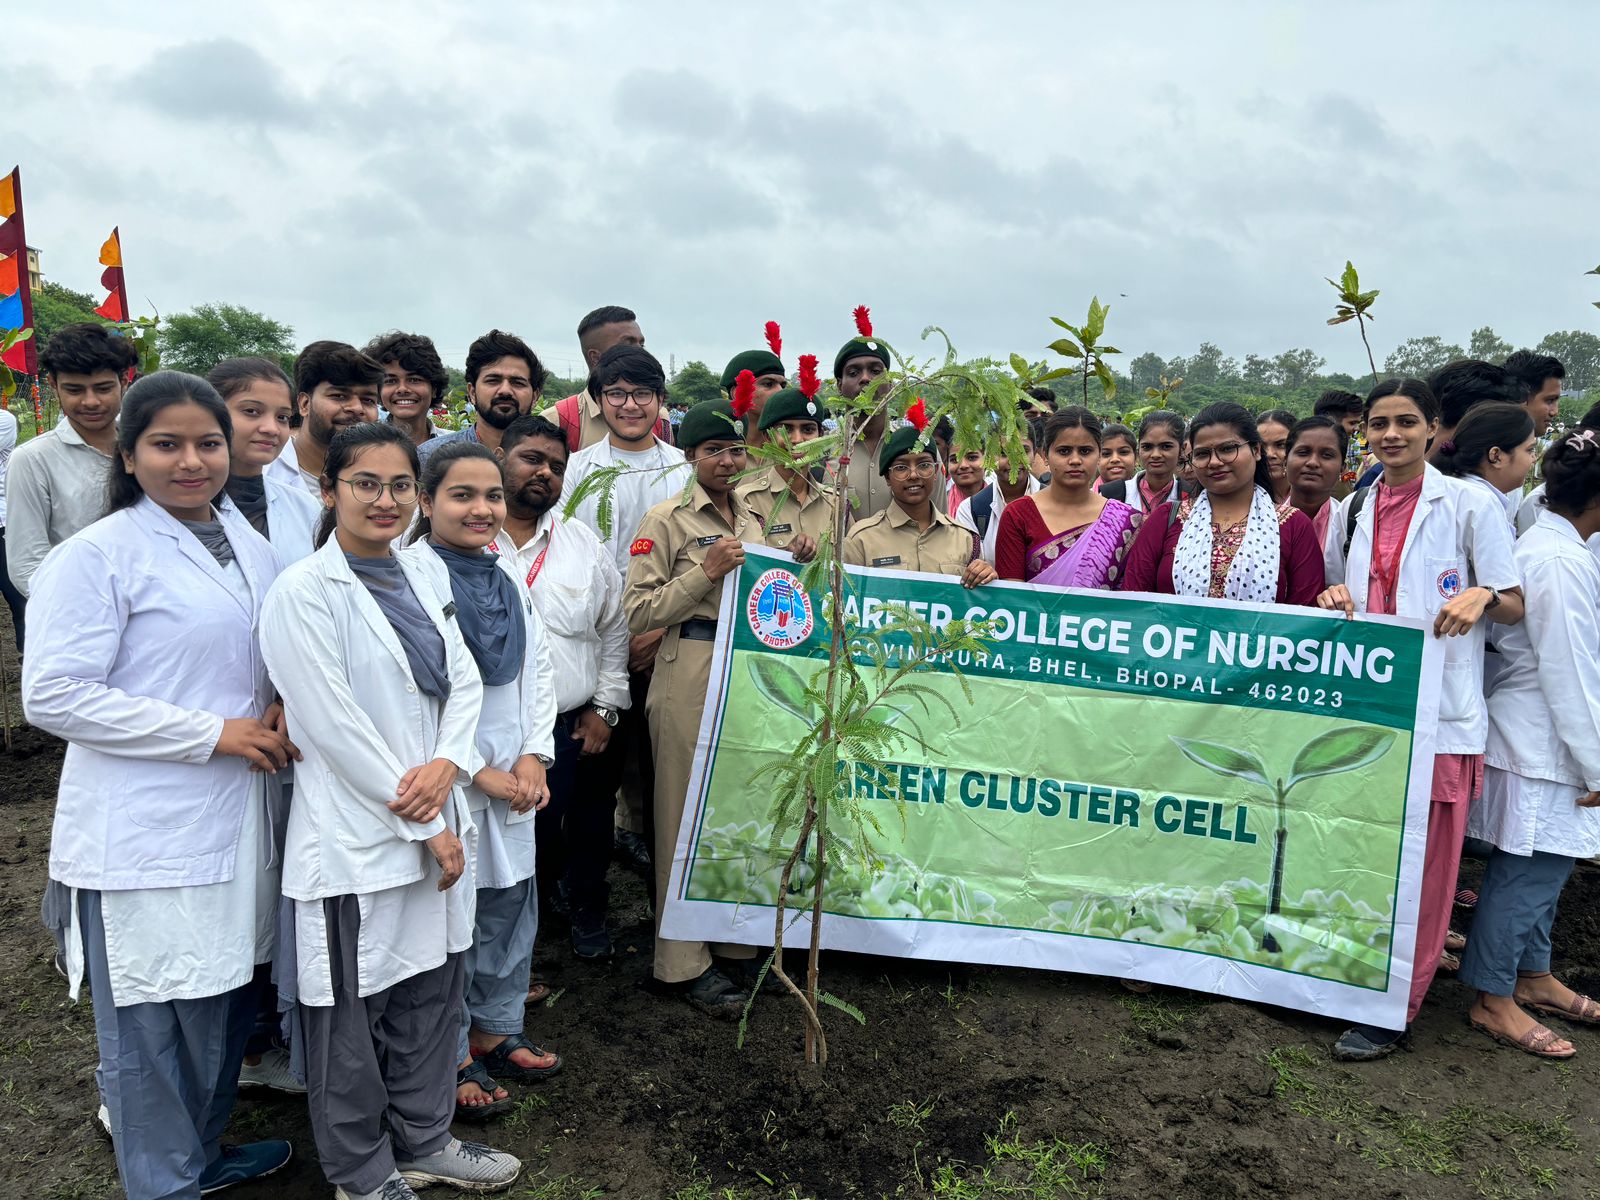 Plantation Drive: A sapling to be planted in the name of Mother